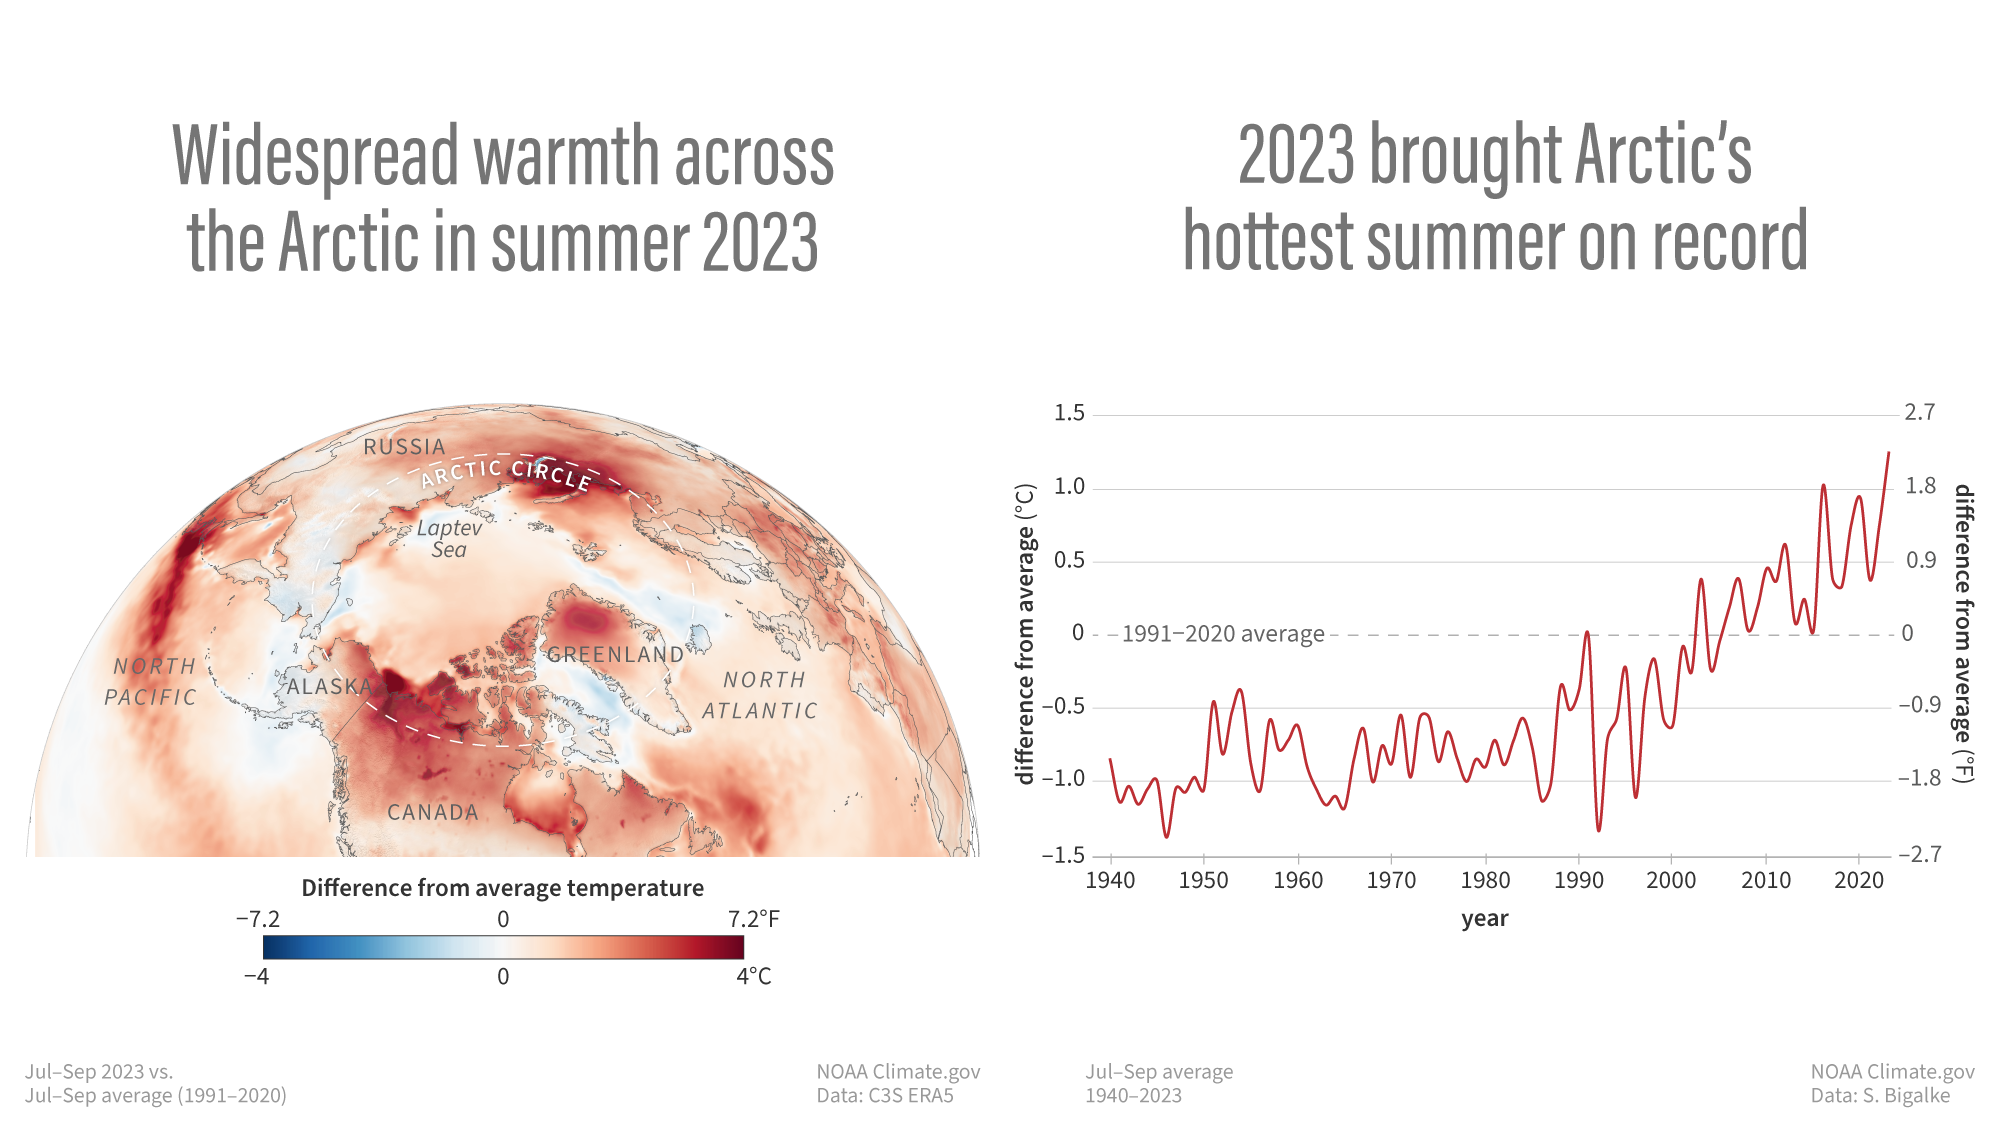 Image showing a map and graph representing Summer (July-September) 2023 was the Arctic's hottest on record.